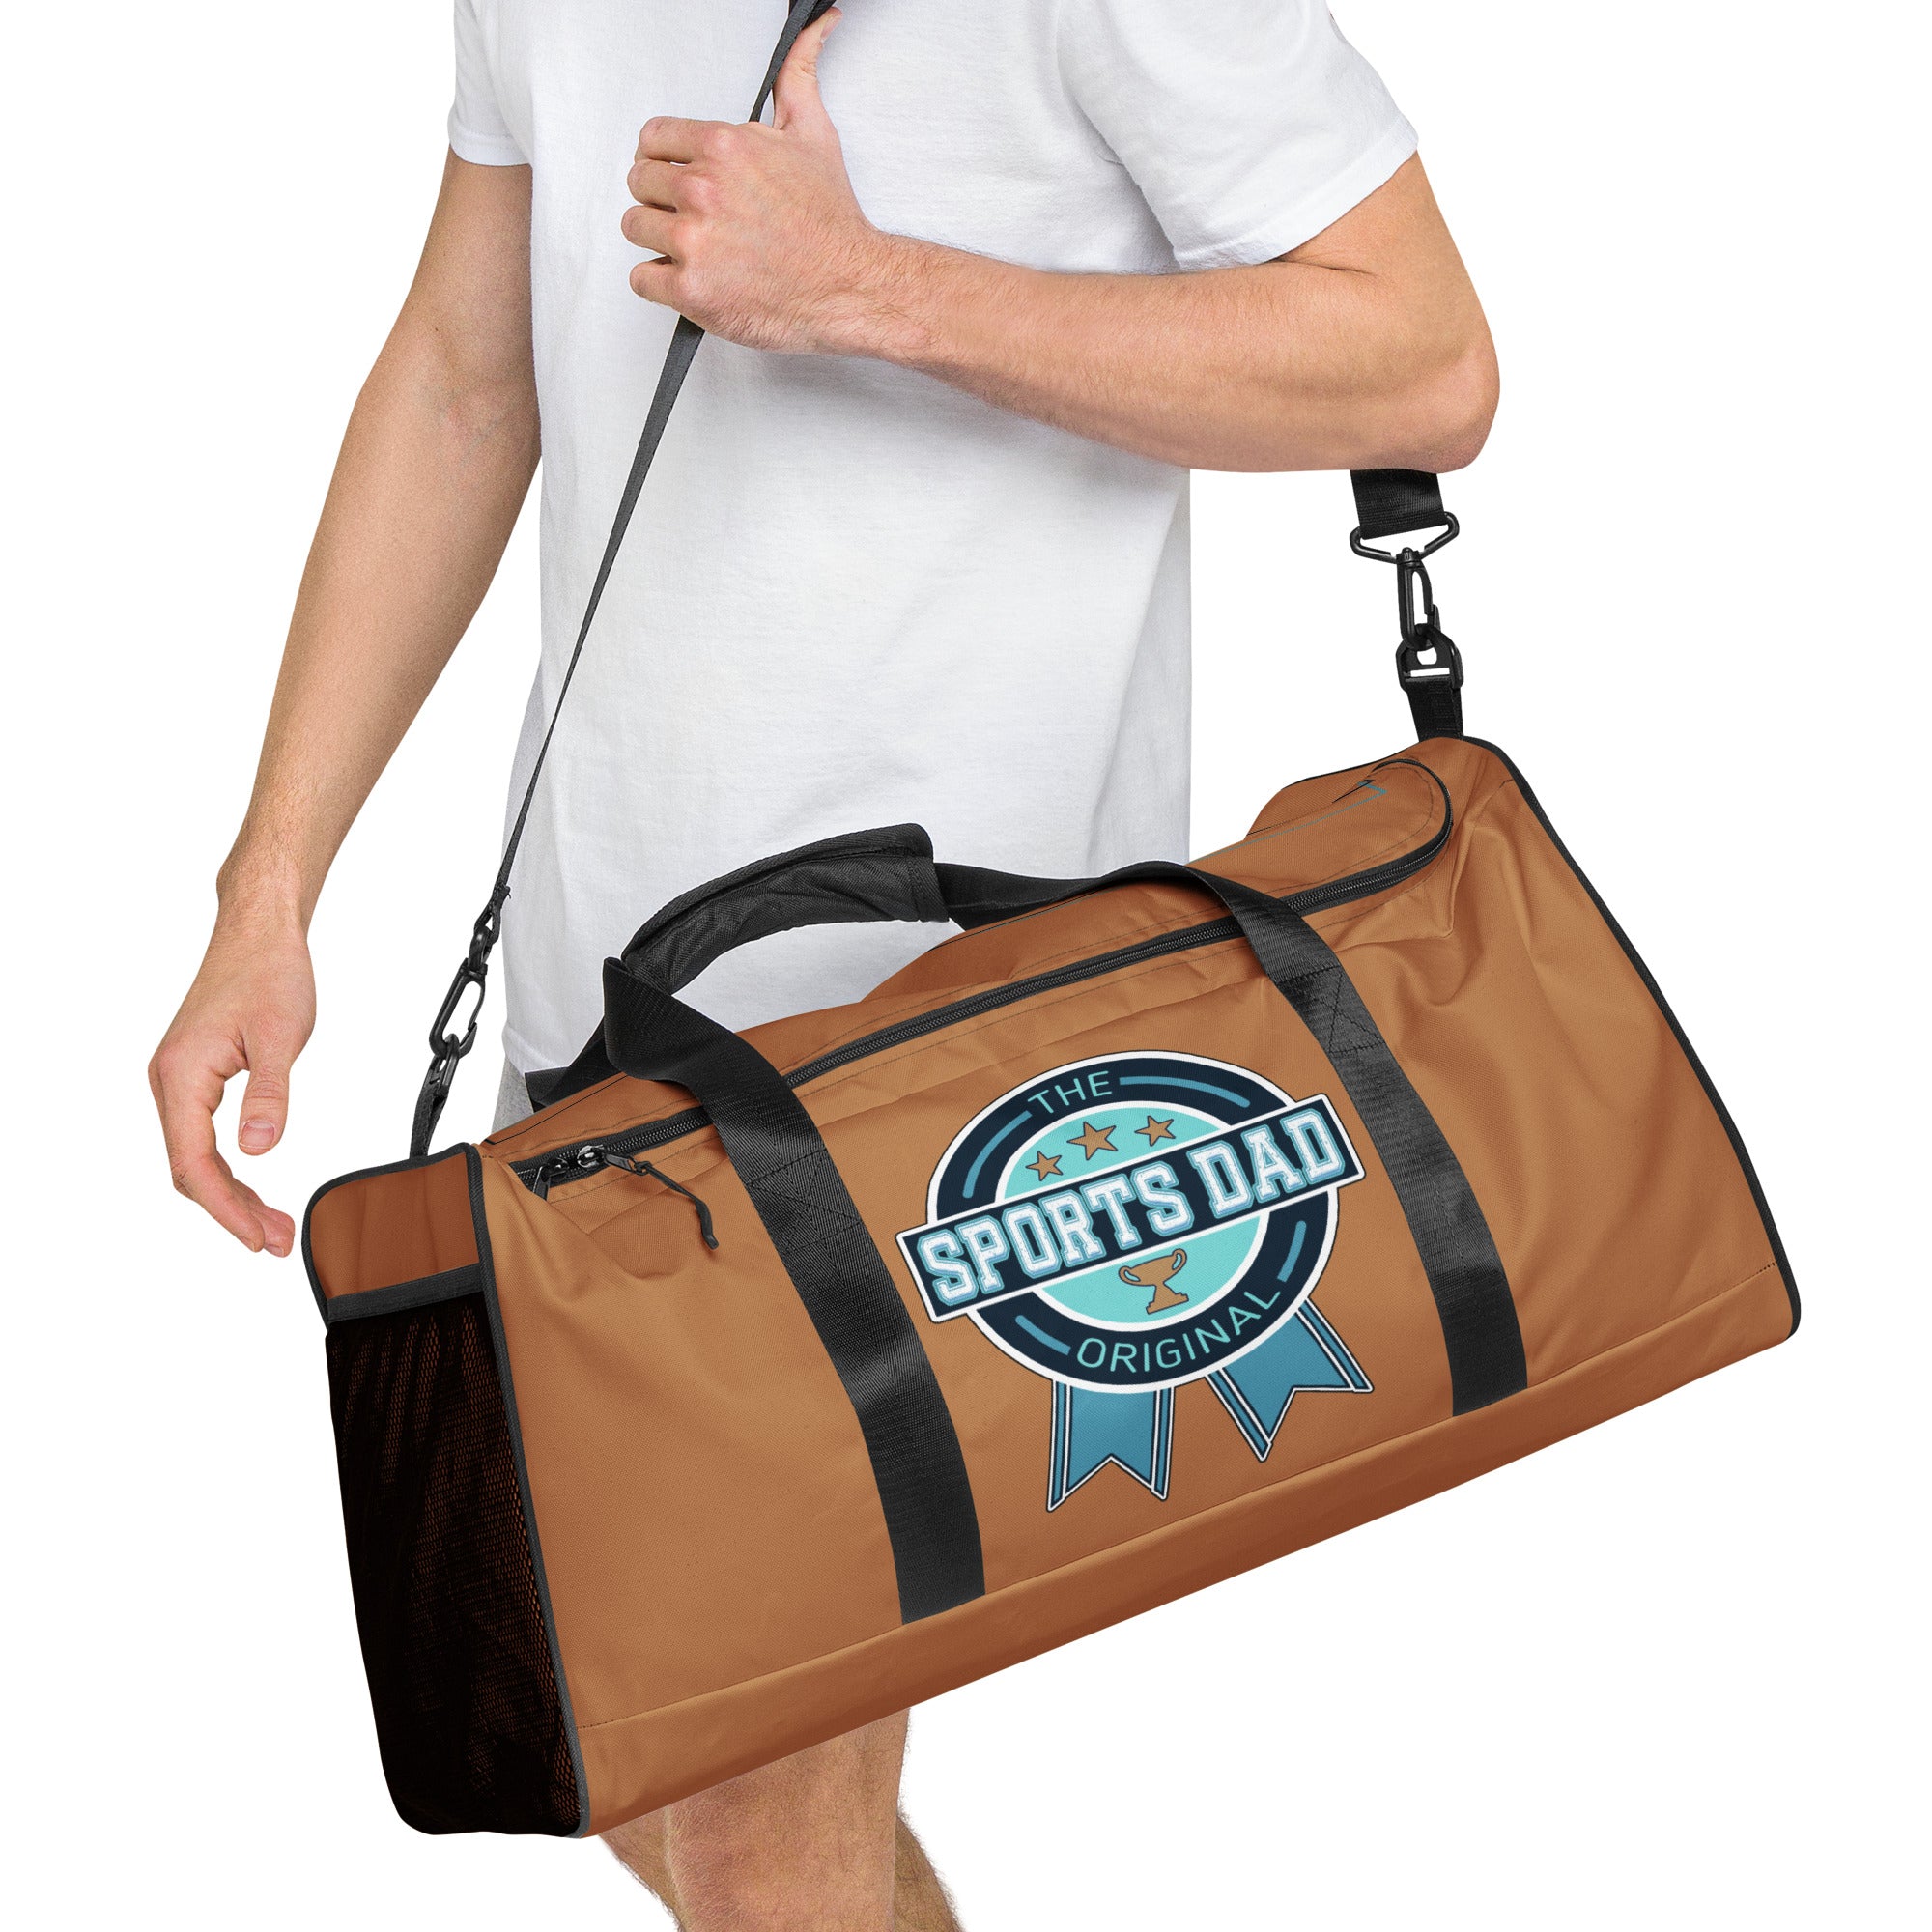 Sports Dad Ultimate Duffle Bag - Nude